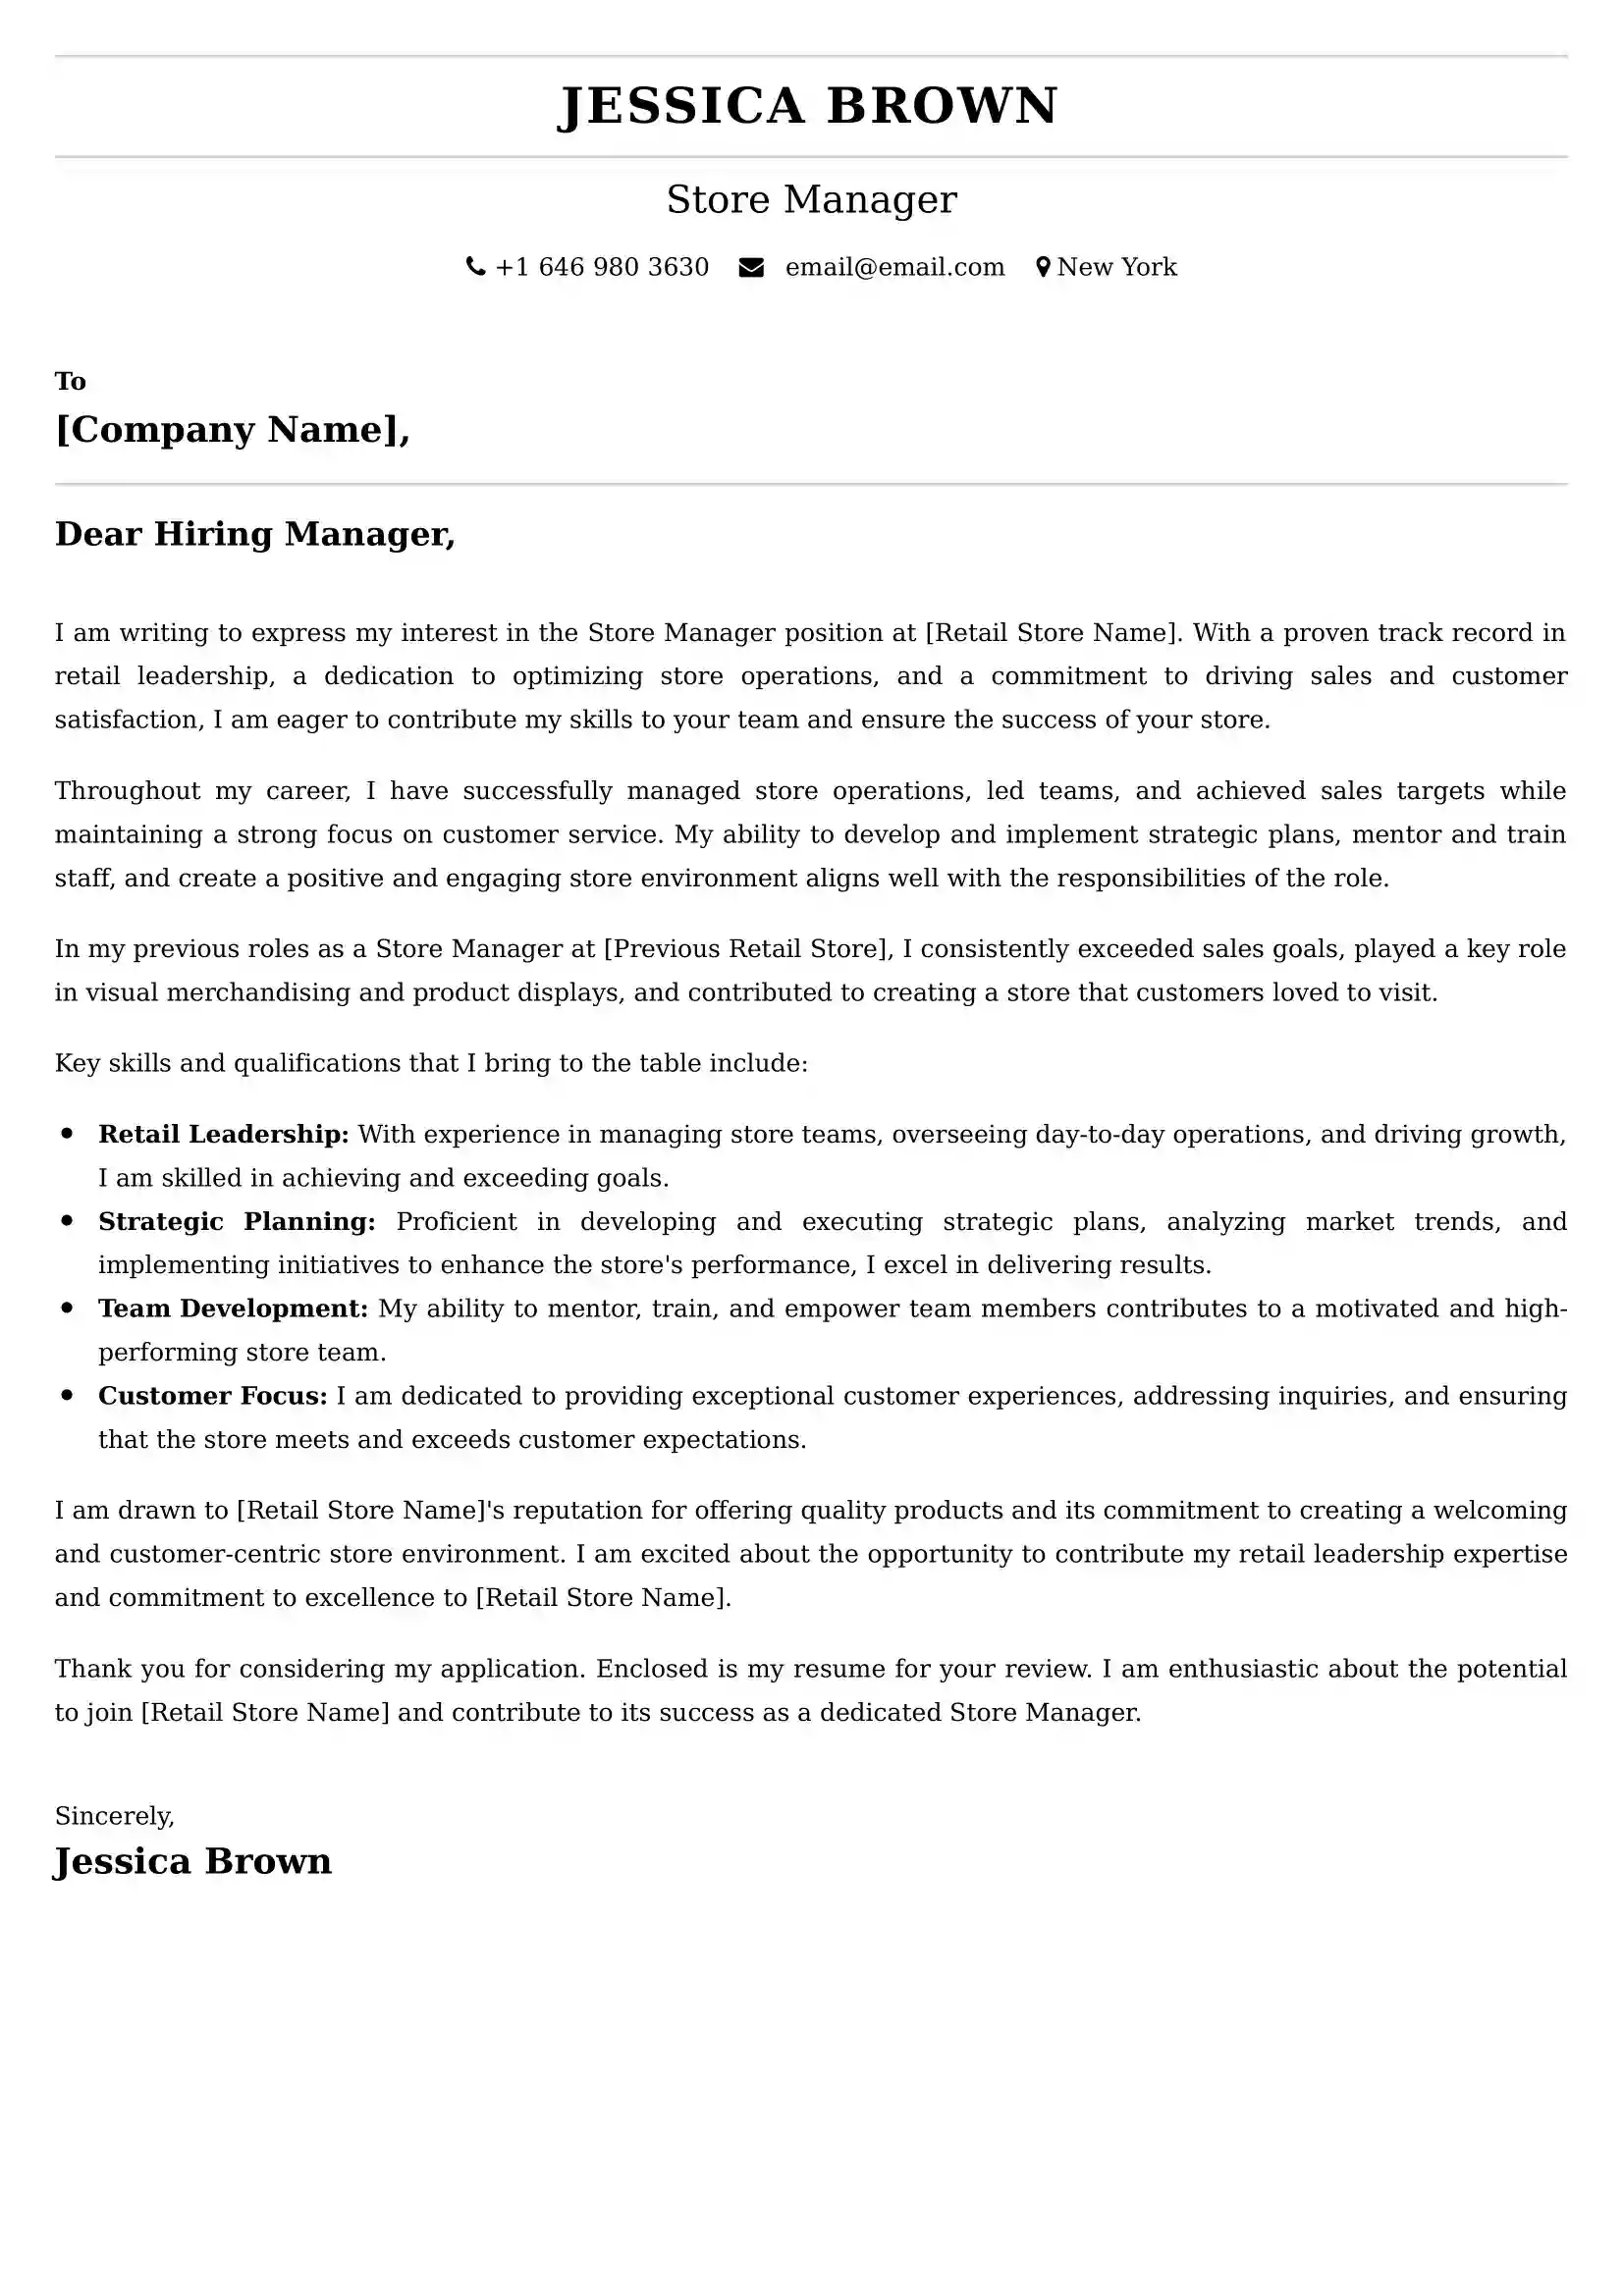 Store Manager Cover Letter Examples India